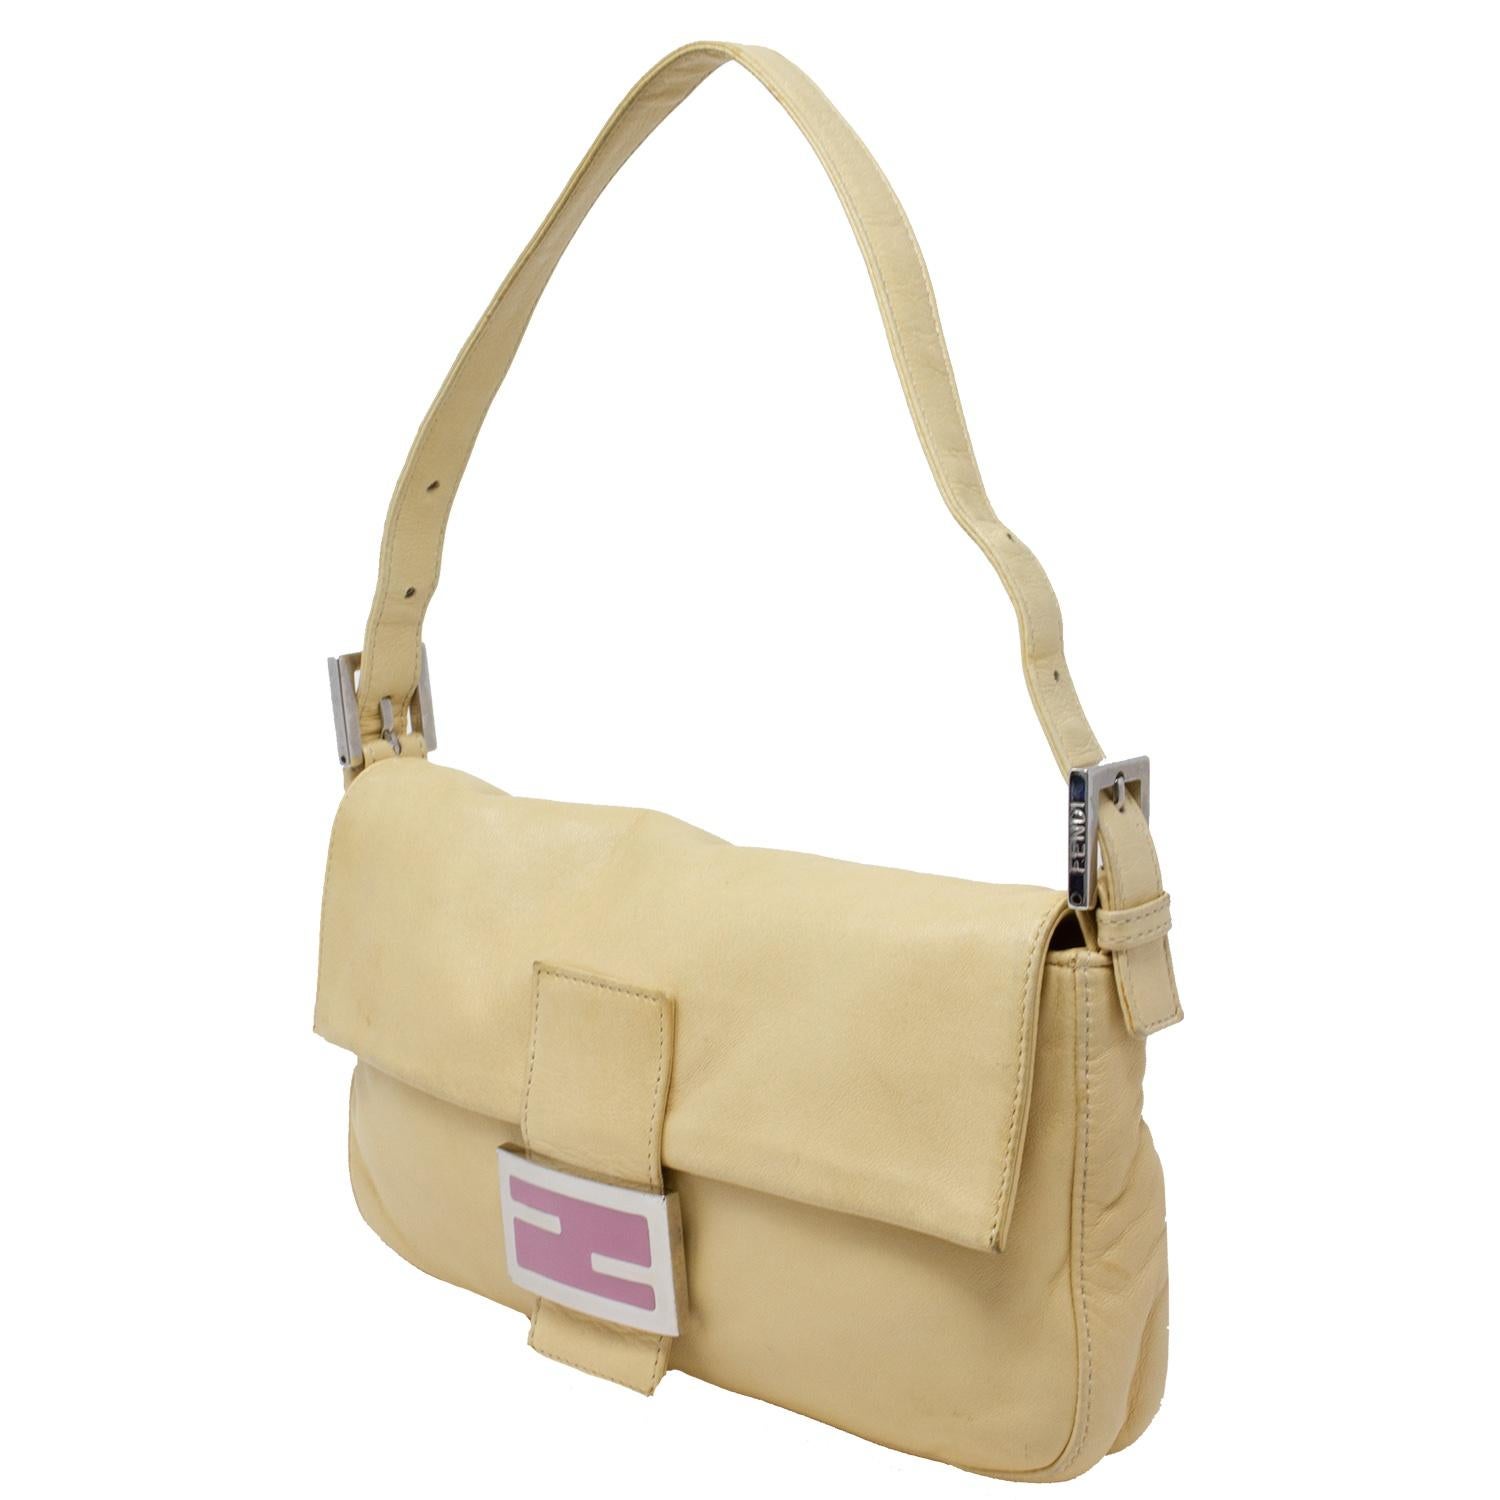 RARE and perfect color combo Fendi Baguette. We love the tones. In beige soft lambskin leather with a light pink logo plate, the front magnetic snap closure opens up to to a satin pink lining with a single zip pocket. The logo plate is gorgeous and